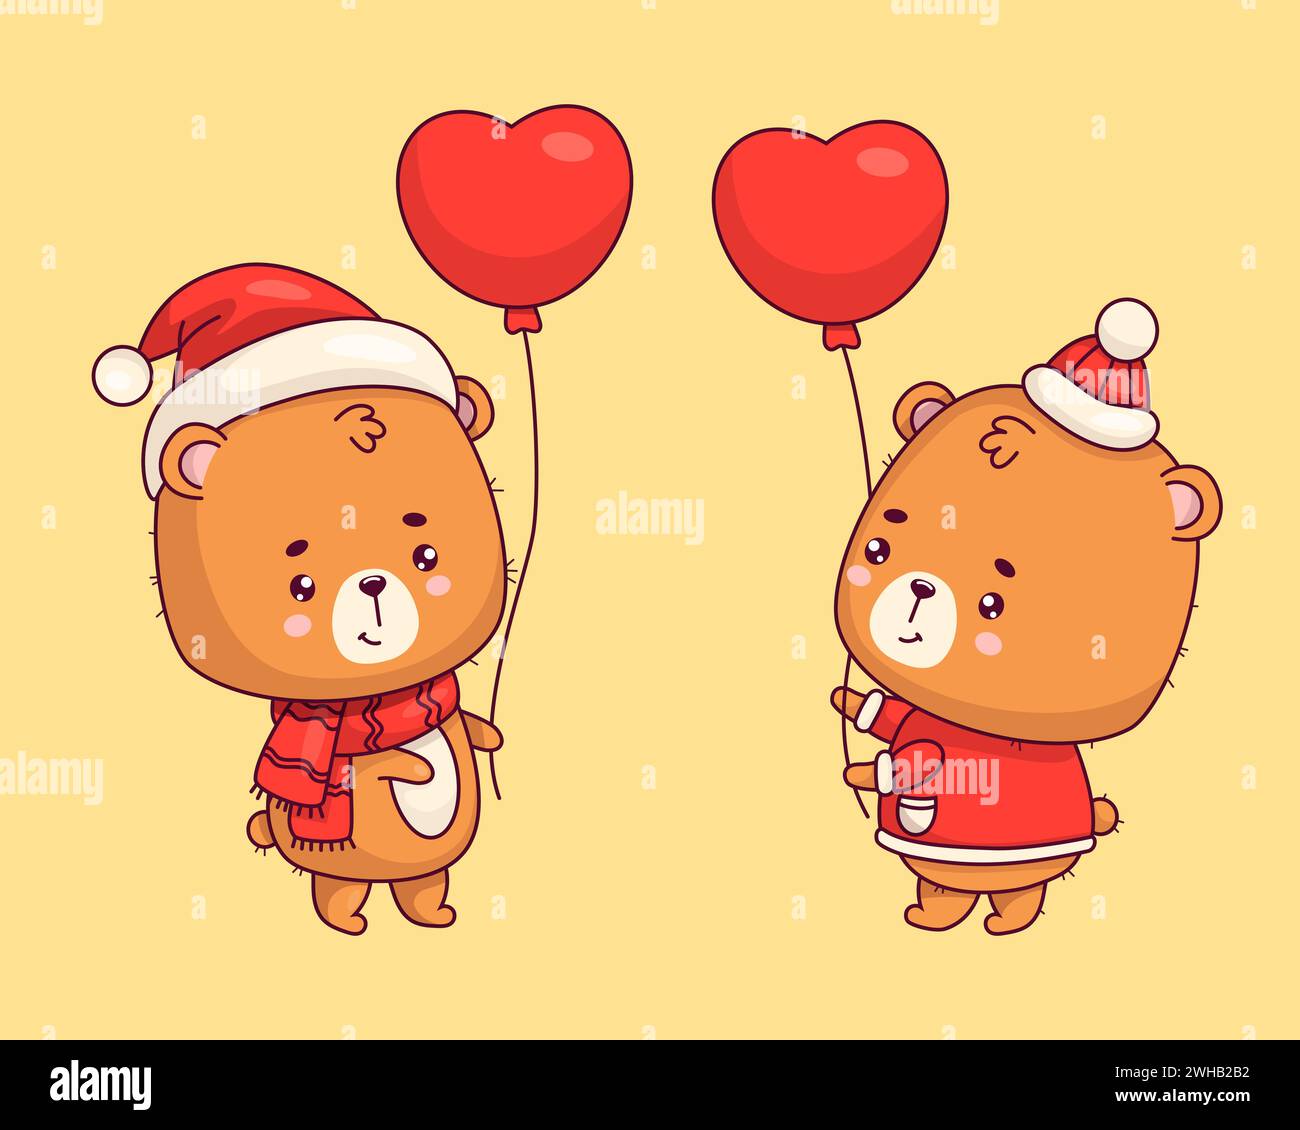 Cute bears with balloon. Romantic teddy bear boy and girl in winter clothes. Isolated festive enamored animals kawaii character. Vector illustration. Stock Vector